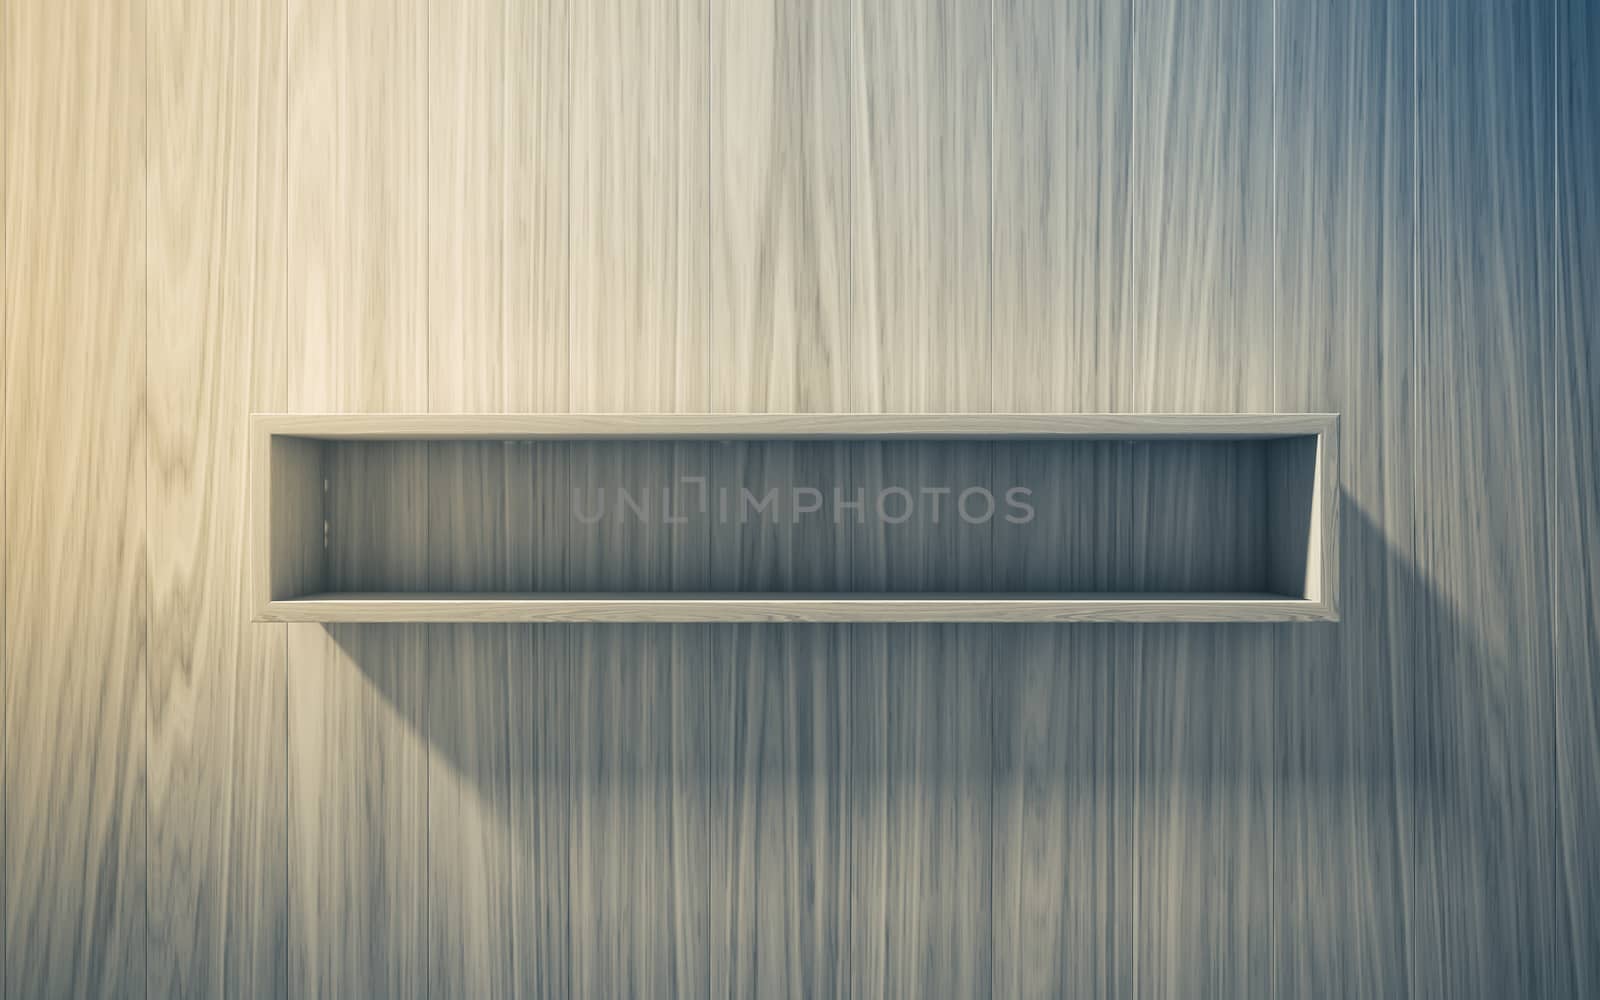 3d isolated Empty shelf for exhibit on wood background, concept